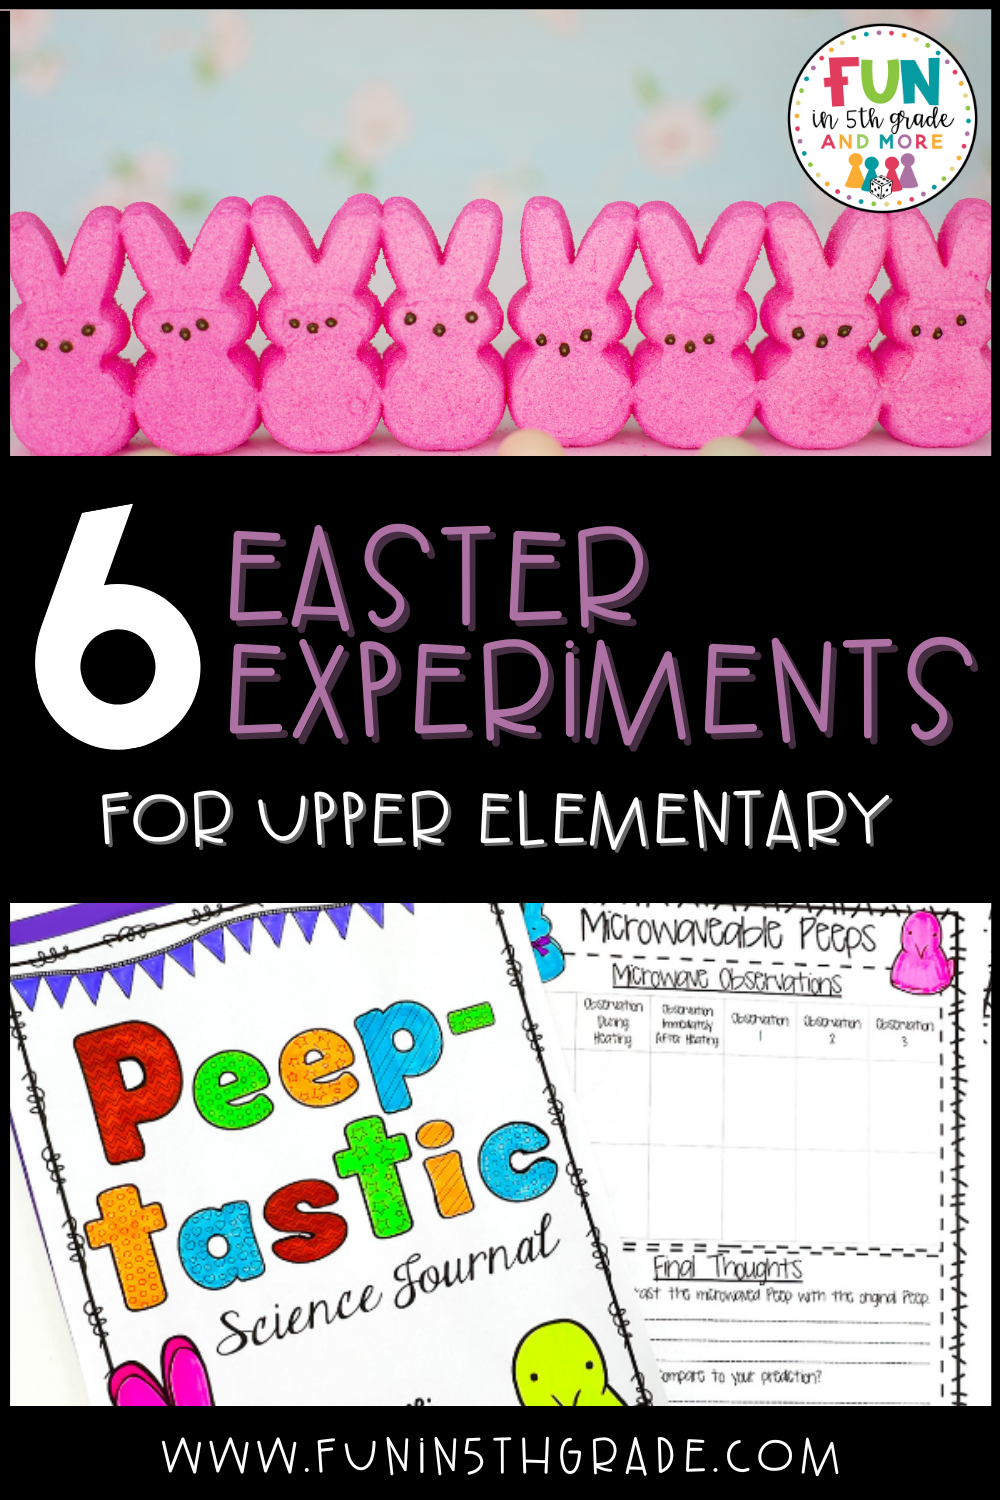 6 Easter Experiments for Upper Elementary
